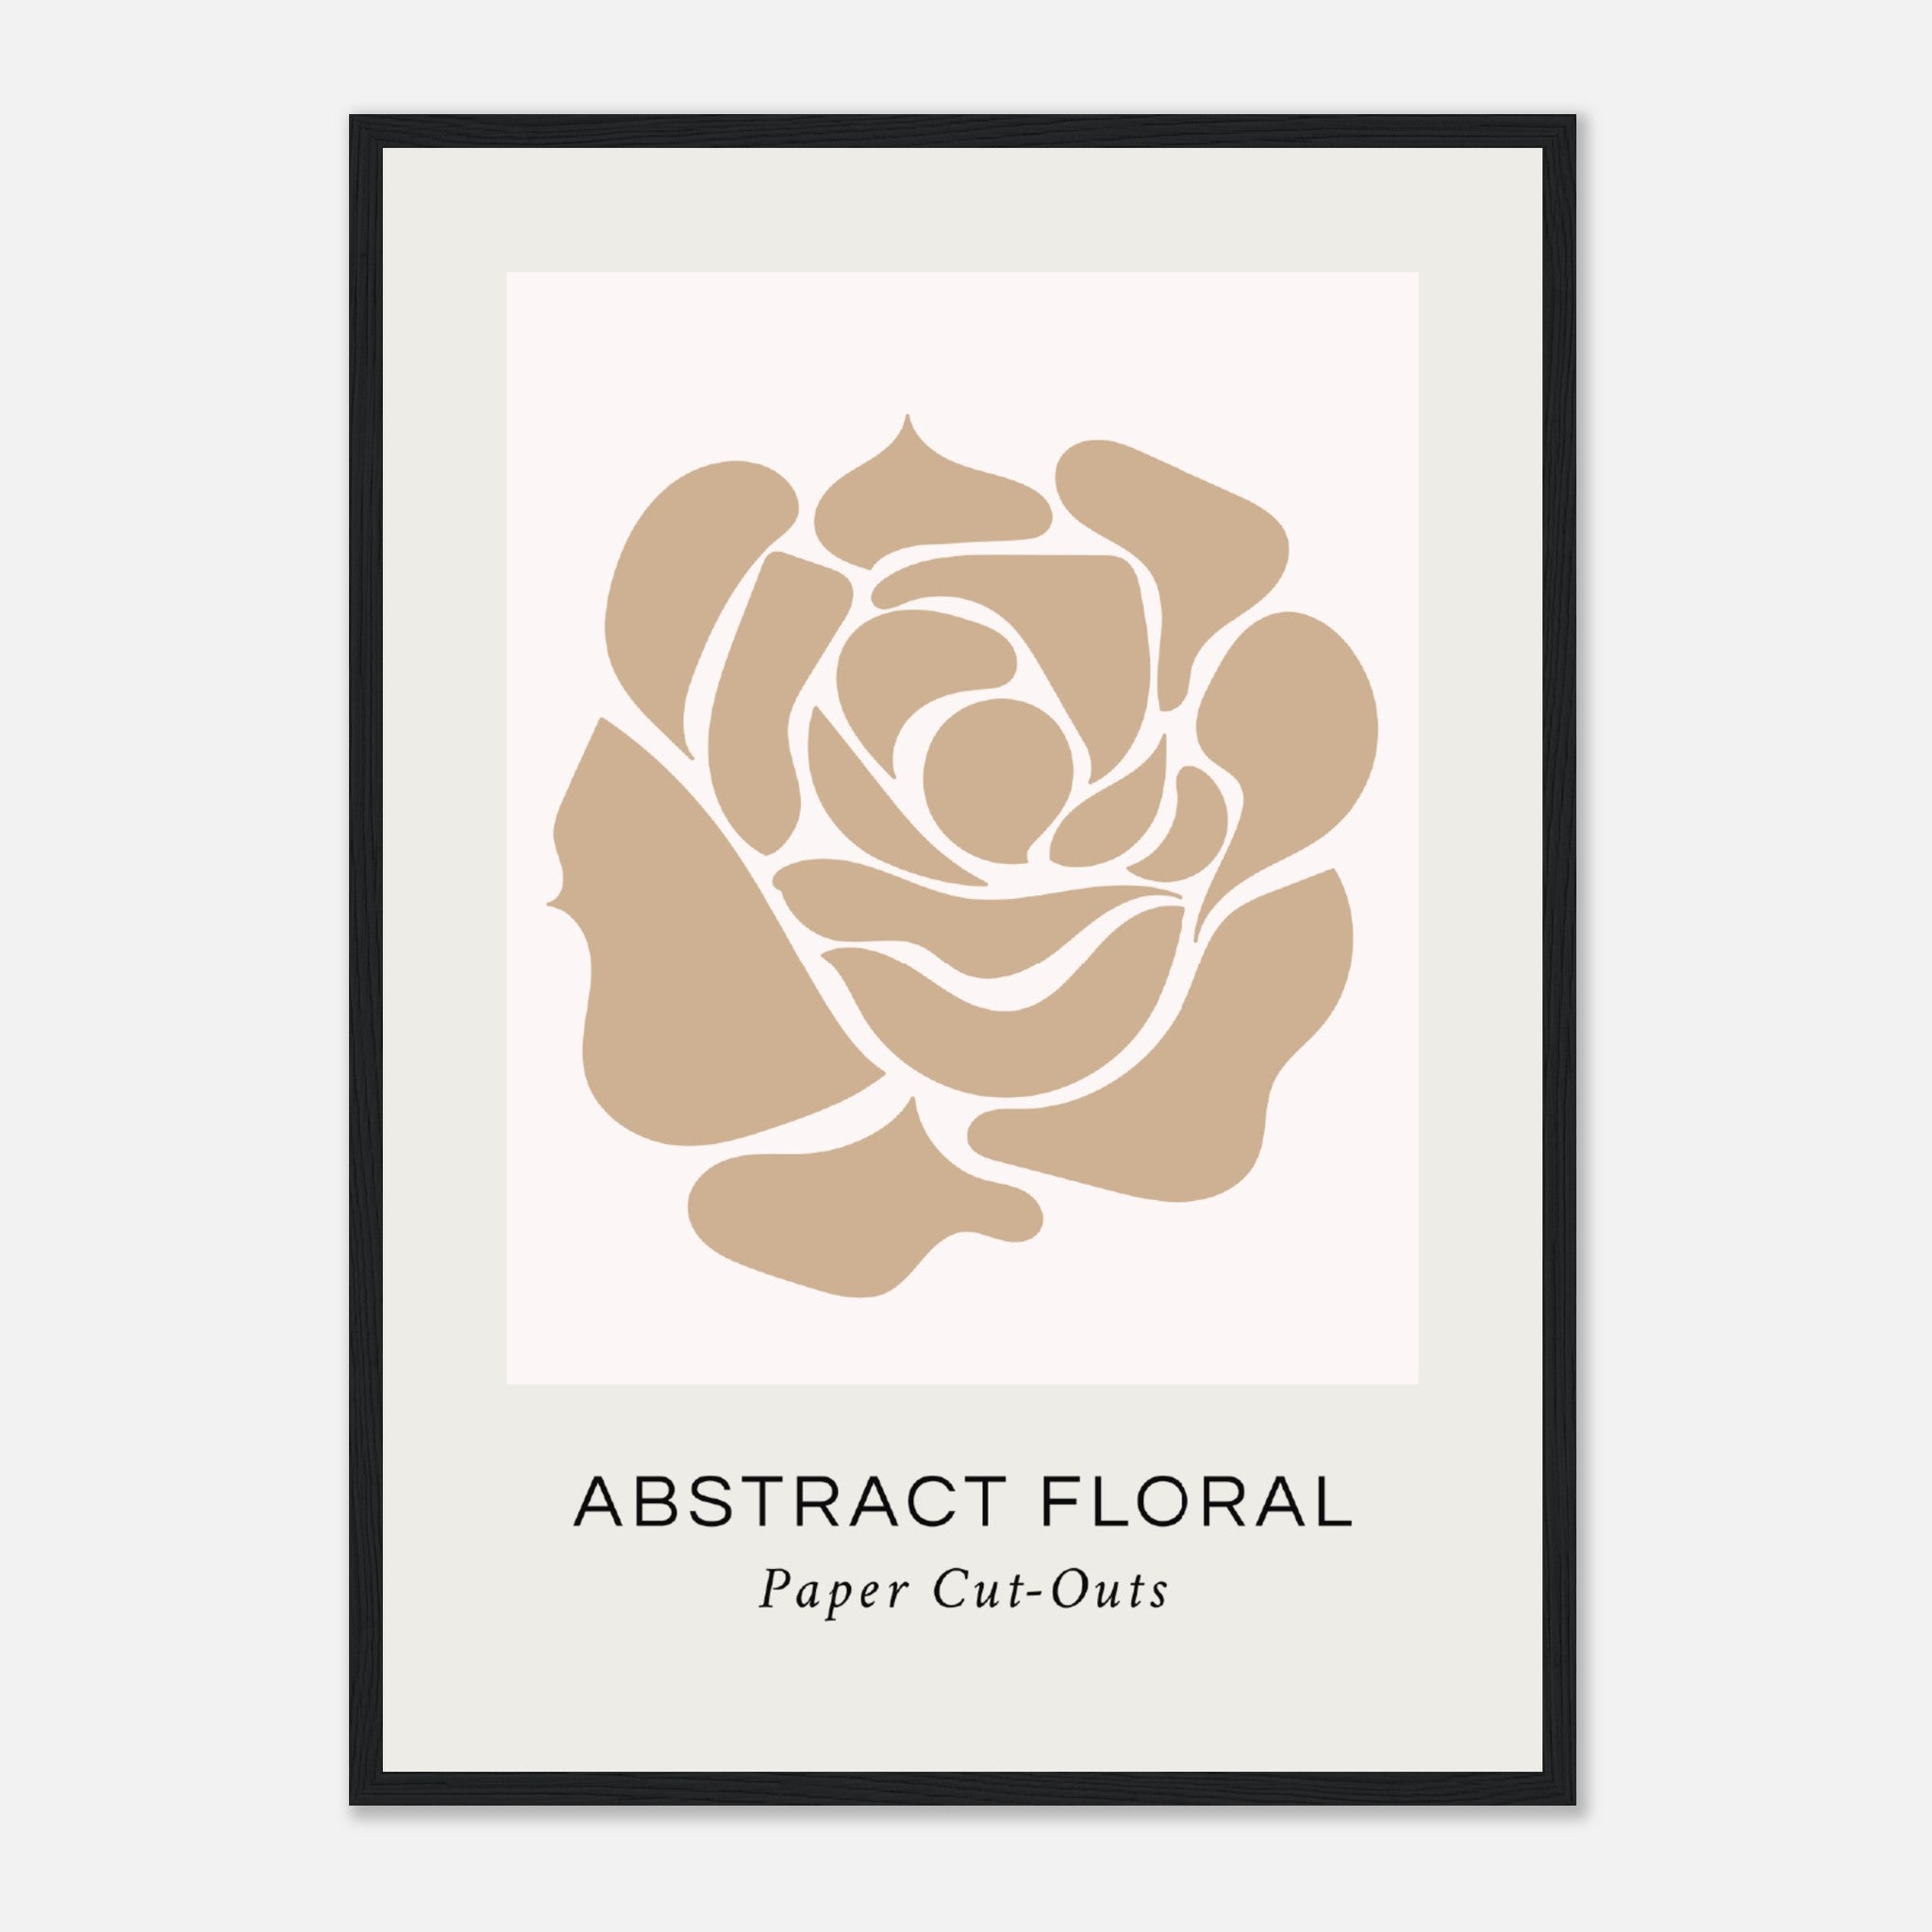 Abstract Floral Paper CutOuts 2 Poster